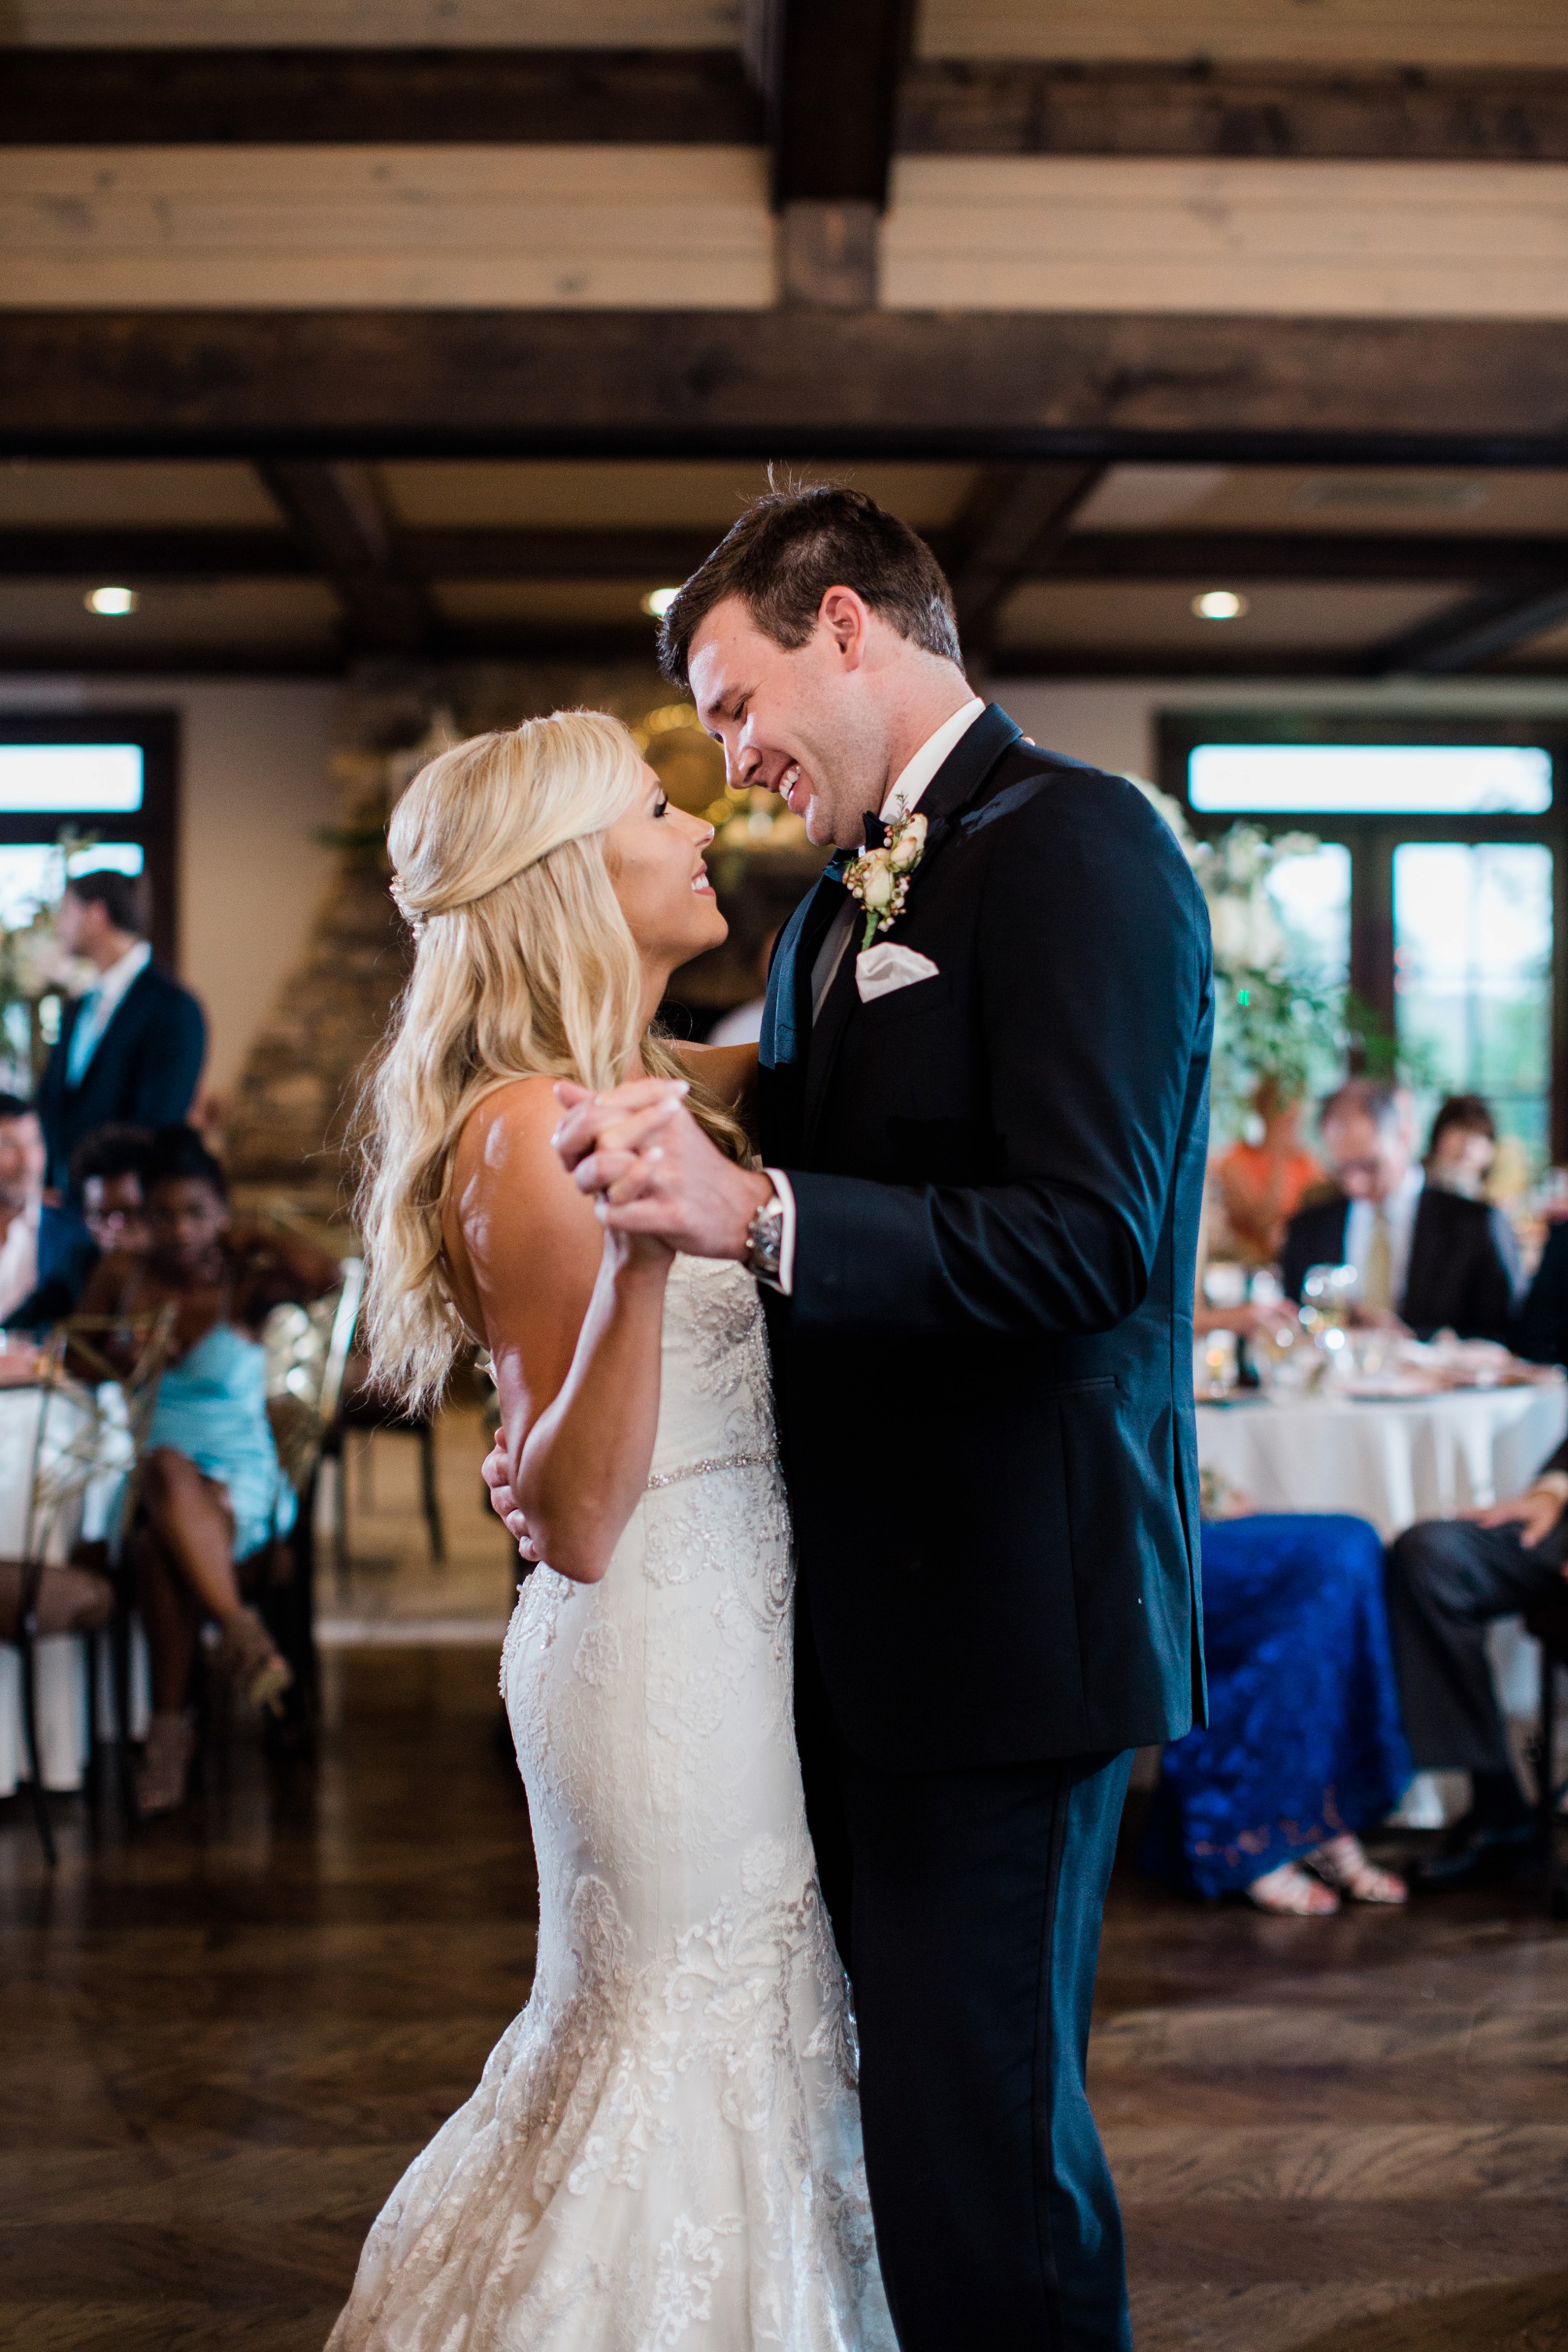 It's your first dance as husband and wife. Let top photographer Rebecca Cerasani document it for you!